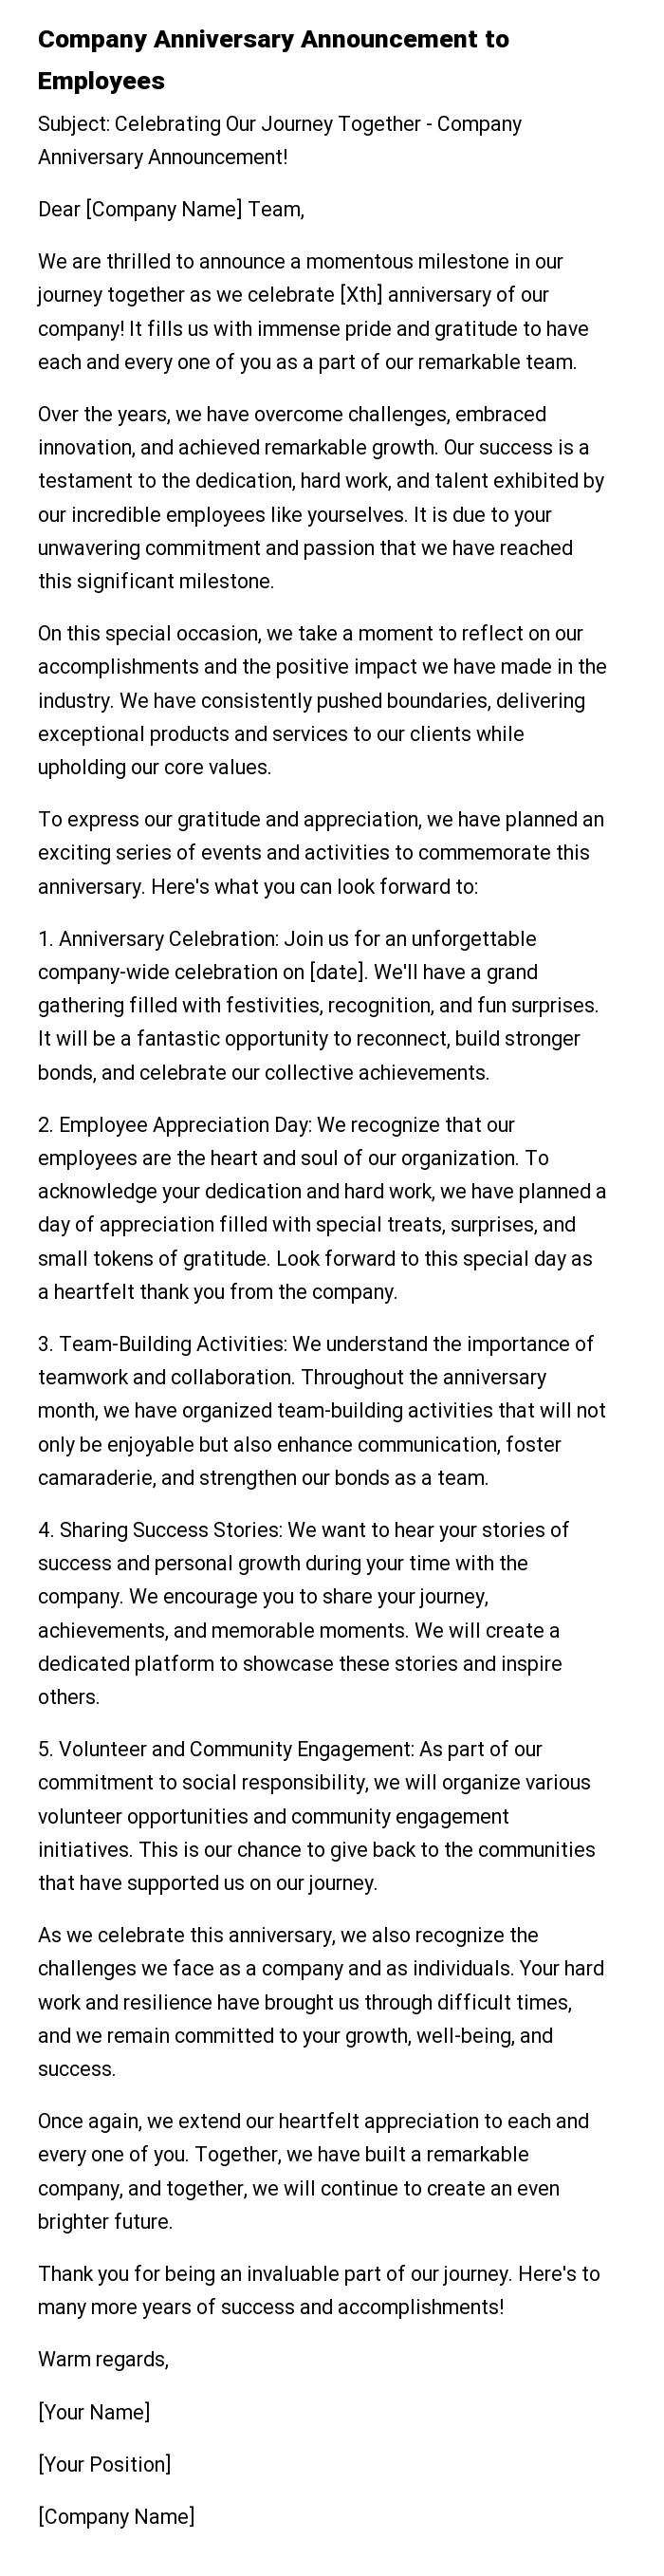 Company Anniversary Announcement to Employees